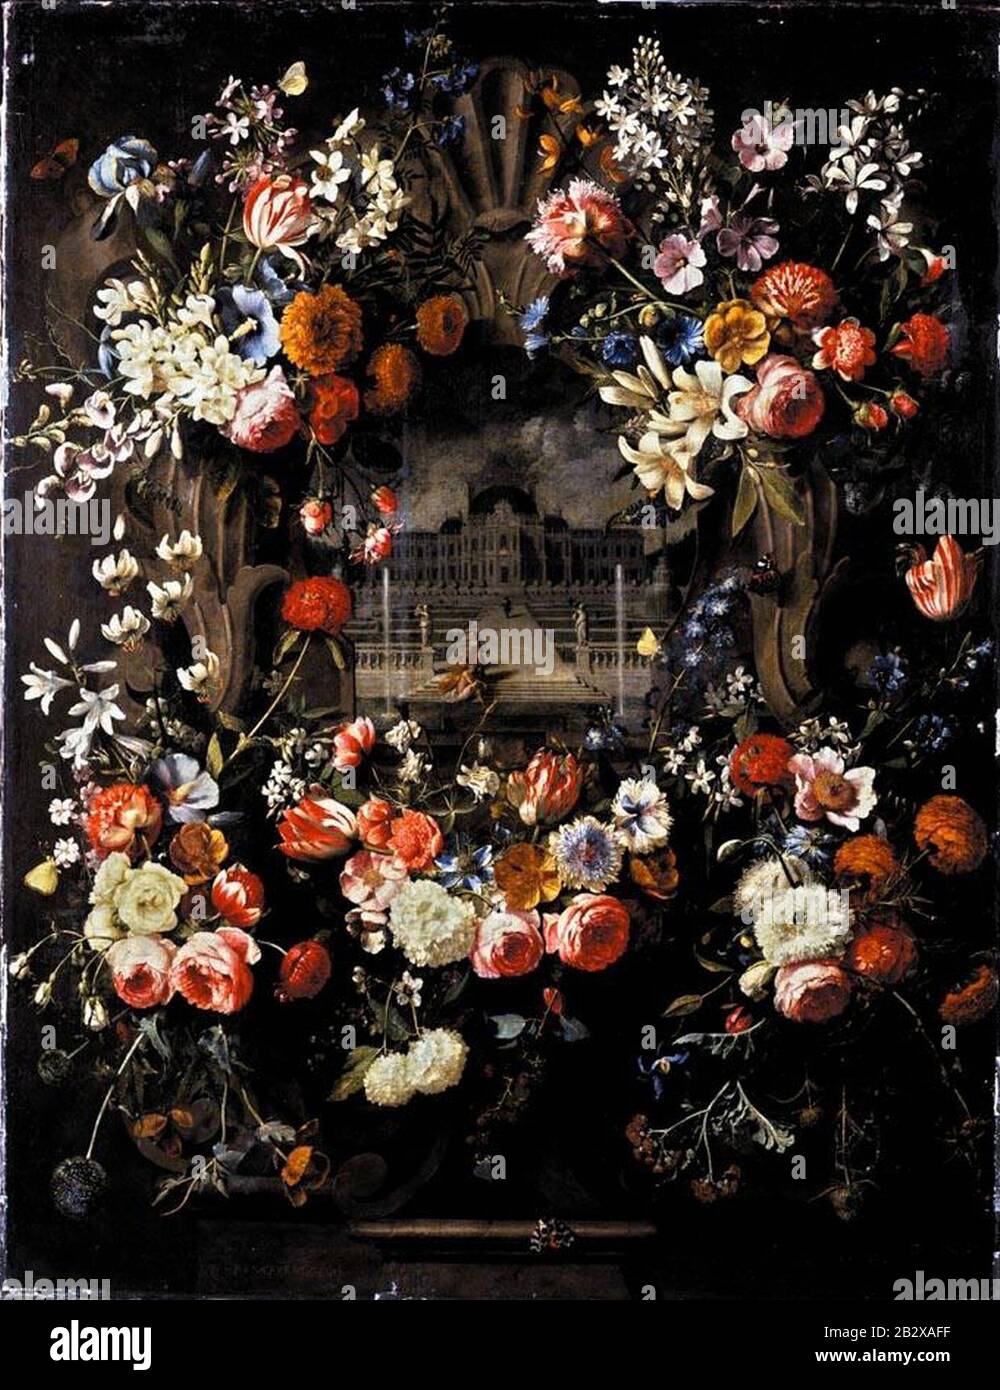 Gaspar Peeter Verbruggen - Still life of garlands of flowers adorning a carved stone window, a palace garden with David and Bathsheba beyond. Stock Photo